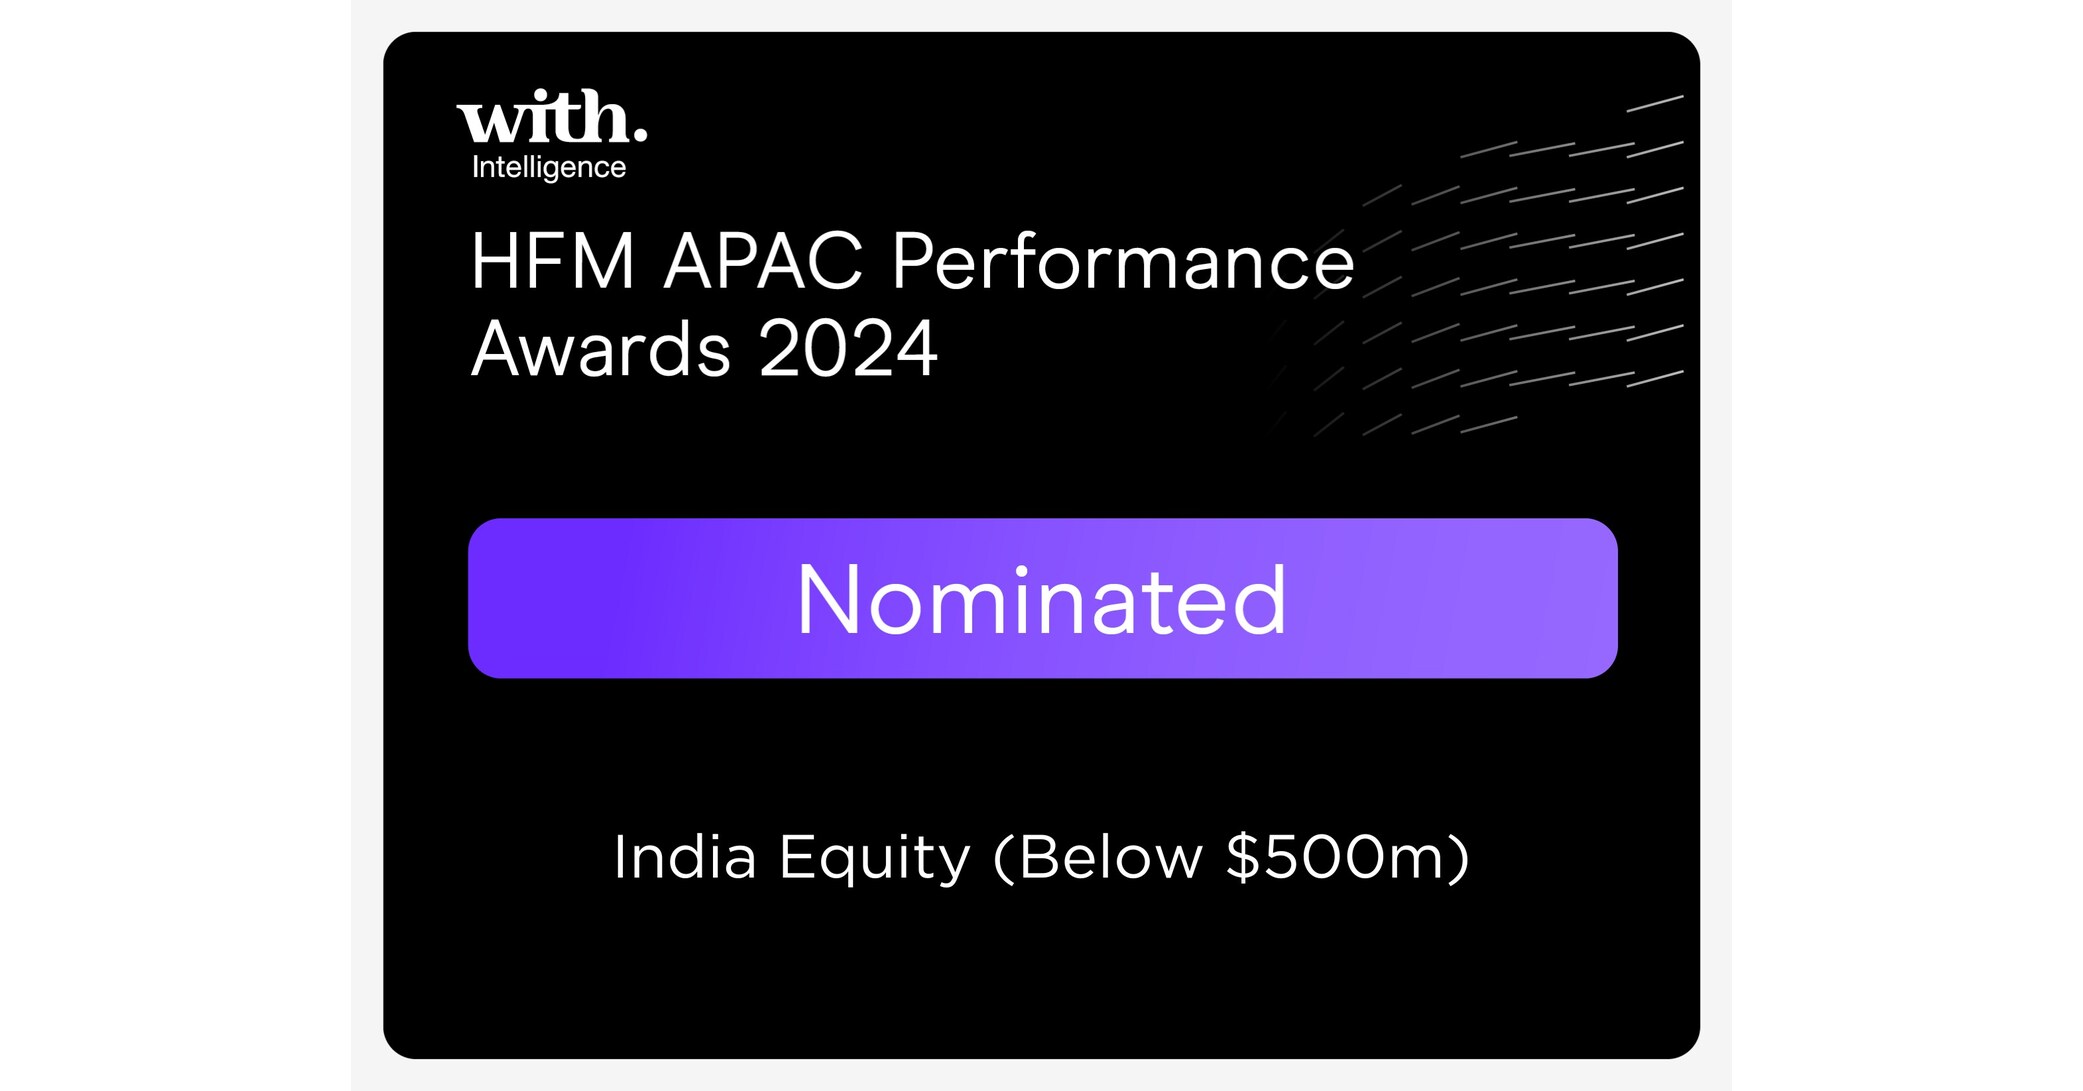 India Insight Value Fund nominated as Best Indian Equity Fund for HFM APAC Performance Awards 2024